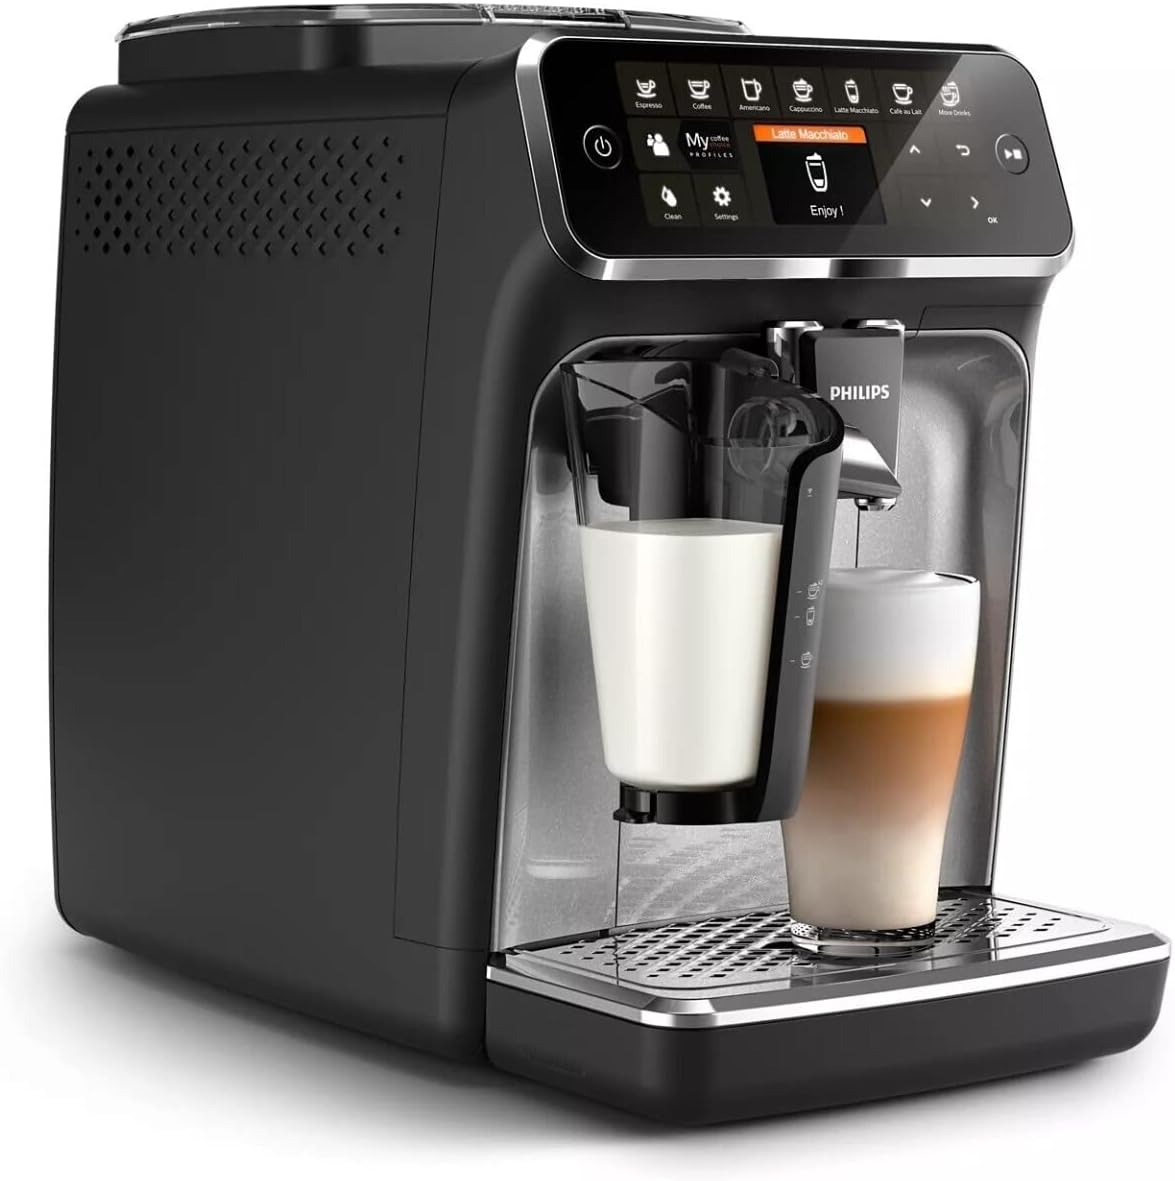 Philips Espresso machine Series 4300 - 5 Coffee Specialities - Classic milk frother - Intuitive touch display - 2 Usage profiles - 1.8 l Water tank - 275 g Bean tank - EP4321/50